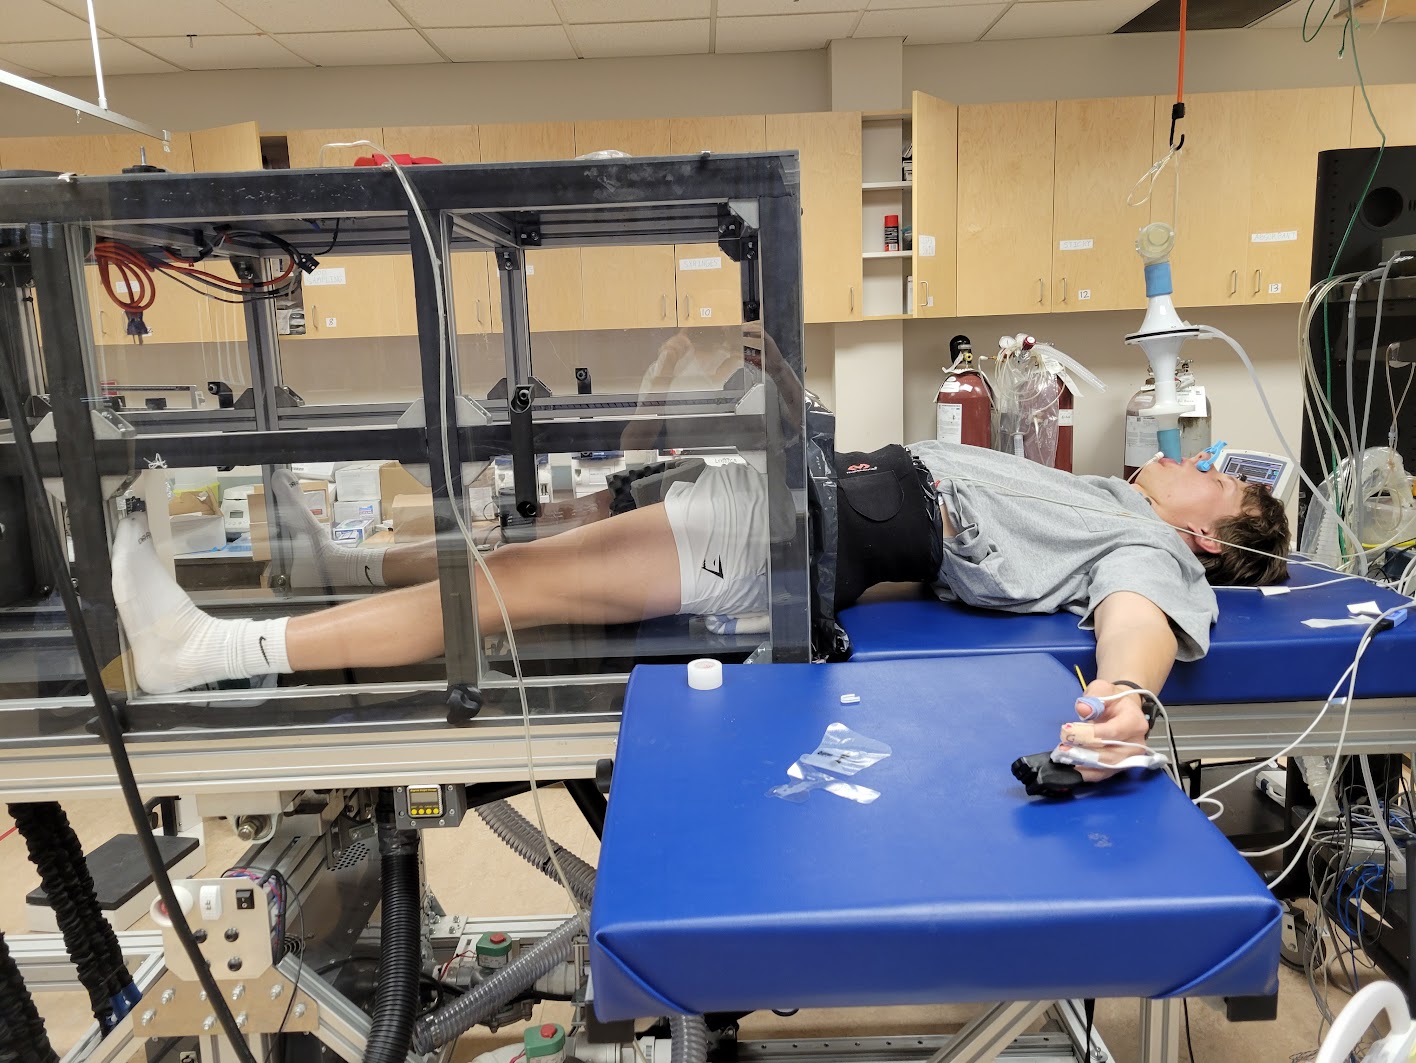 Here, Monteleone lies in a lower body negative pressure chamber. This is used to simulate blood loss and physiologically stress the body’s cardiovascular system. Reflex increases in heart rate and blood pressure can be manipulated and observed in a well-controlled manner, making the device an important tool for physiological research.